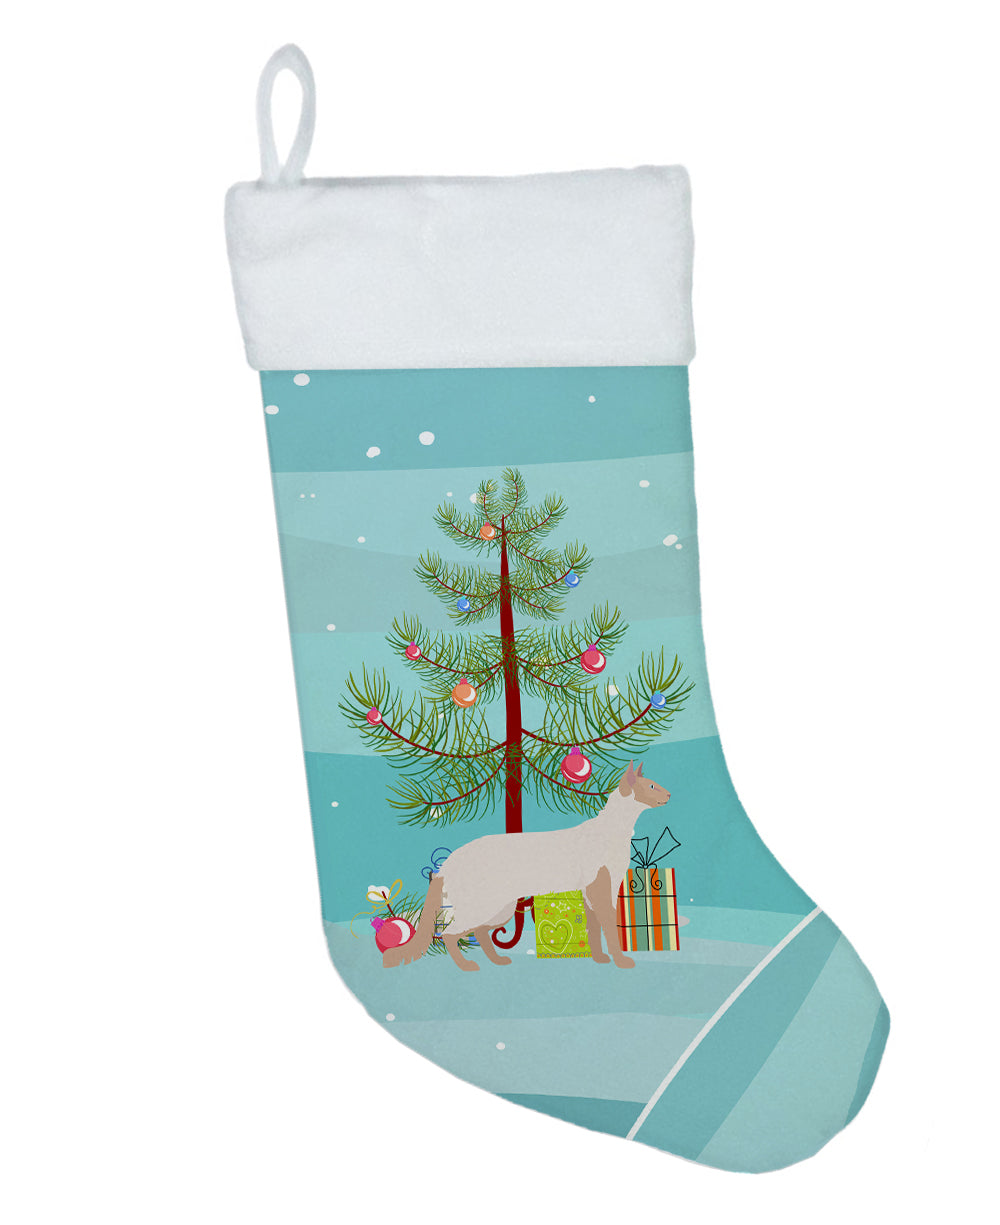 Colorpoint Longhair #2 Cat Merry Christmas Christmas Stocking